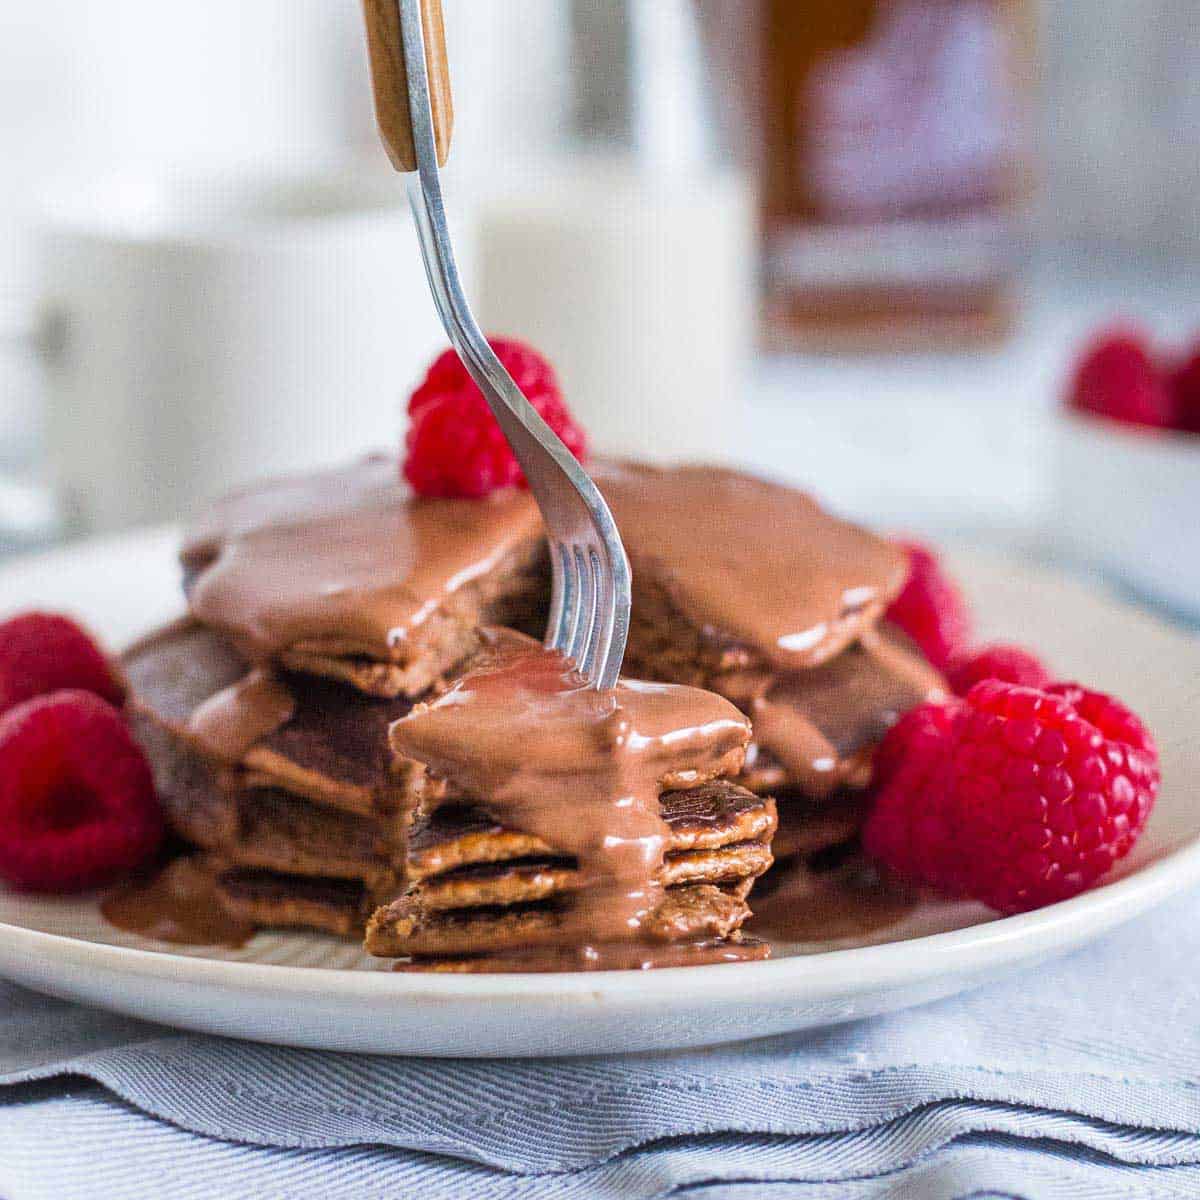 Make a batch of these chocolate protein pancakes with just 6 simple ingredients.